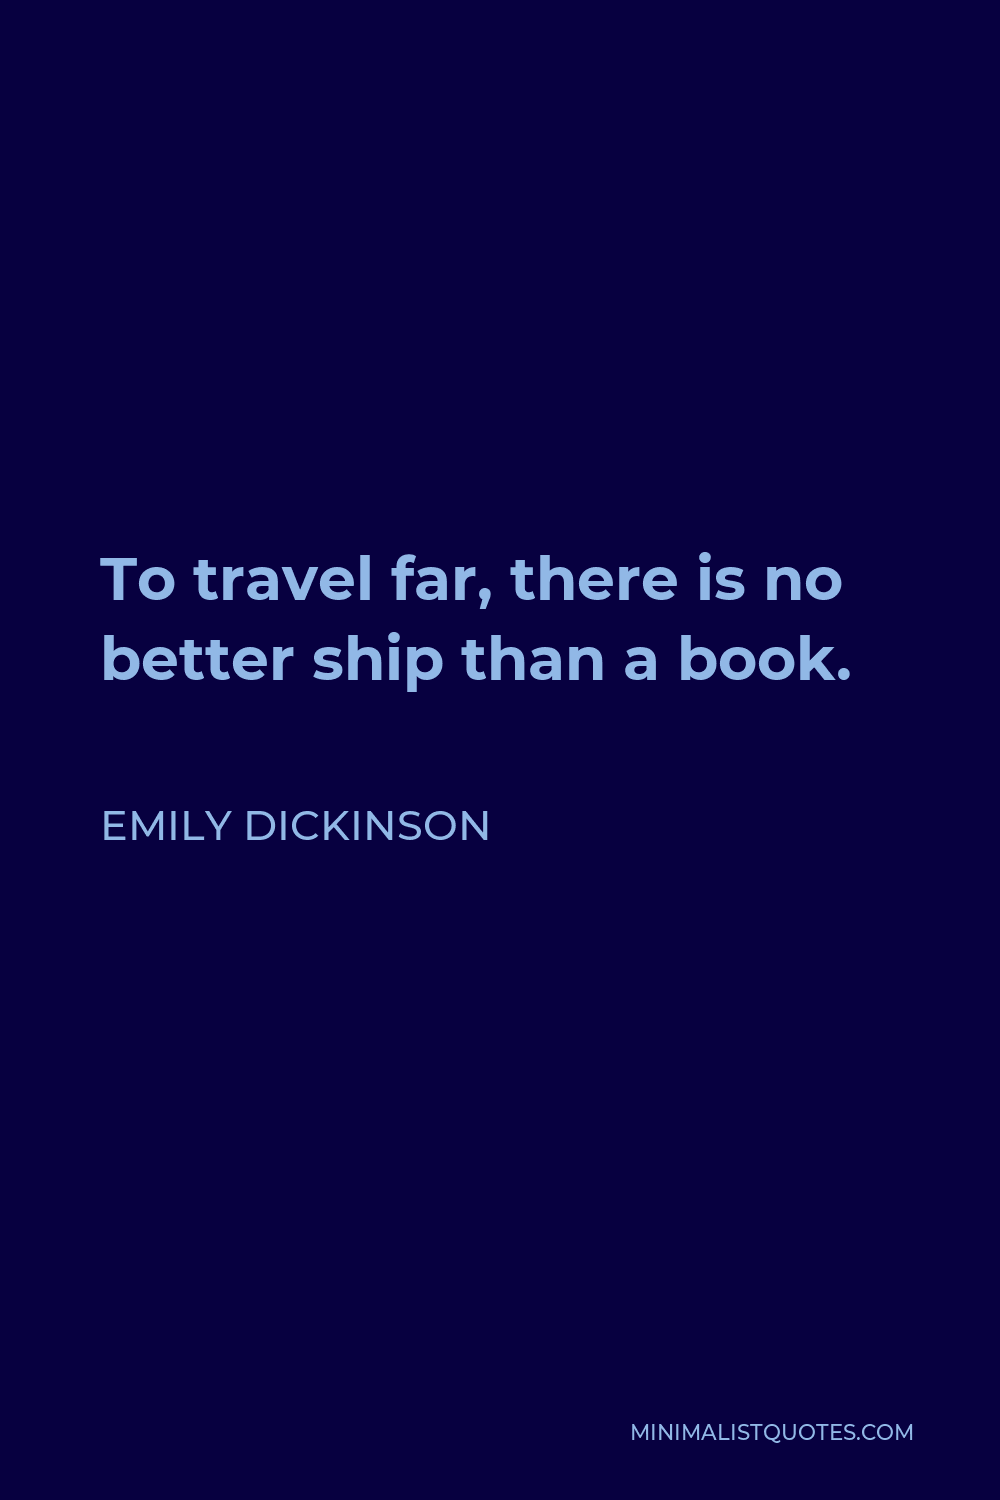 Emily Dickinson Quote - To travel far, there is no better ship than a book.